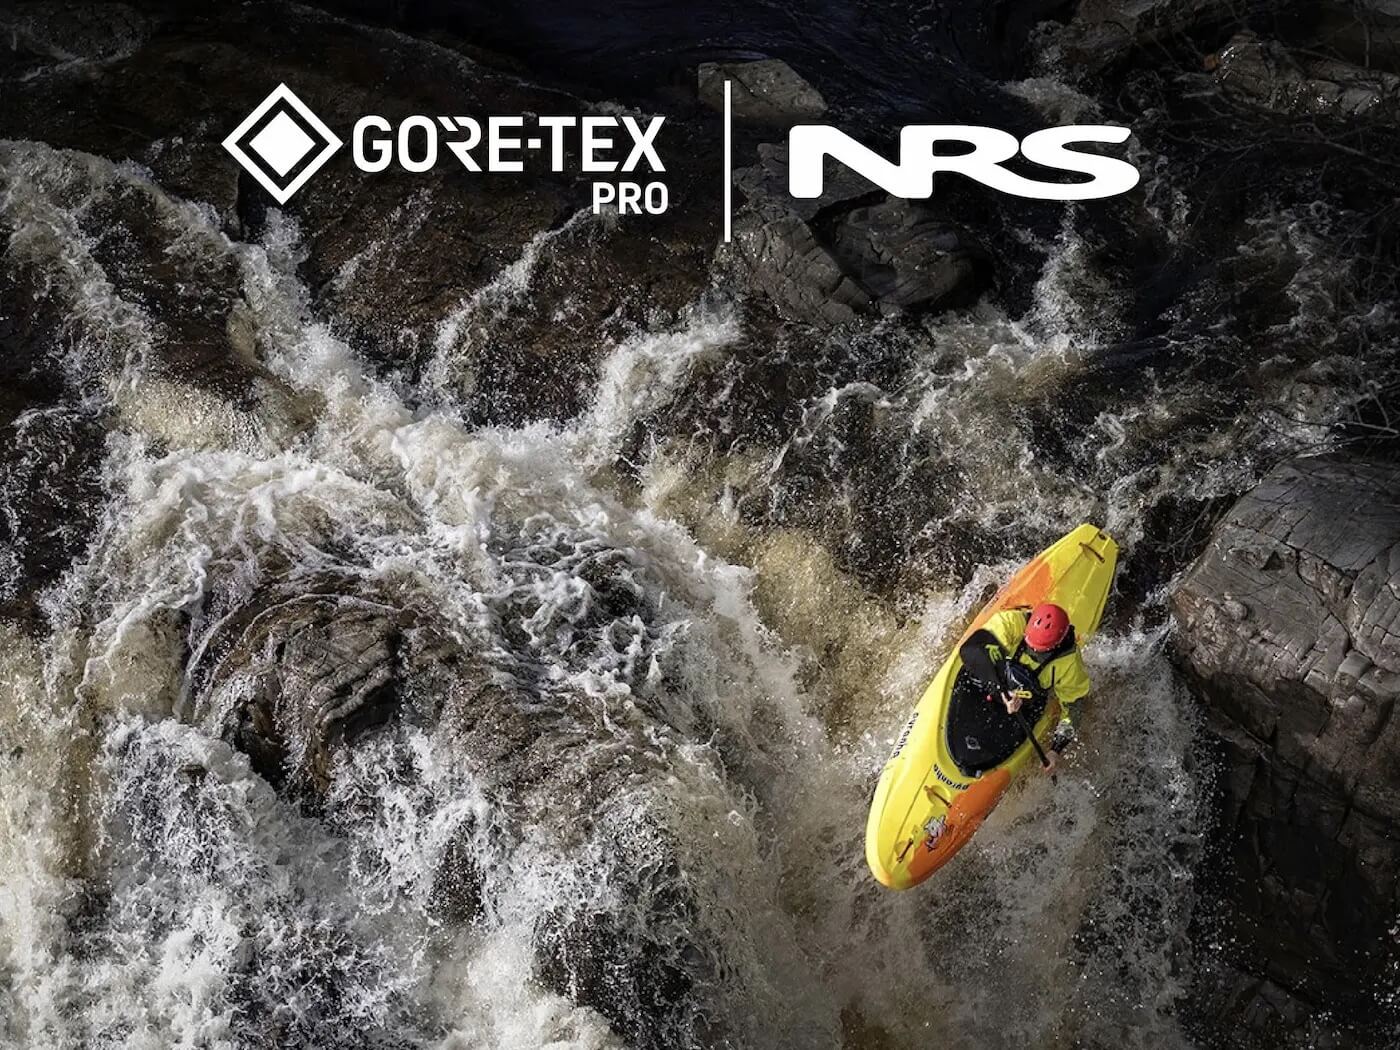 NRS' NEW Gore-Tex Pro Drysuits, Drytops, and Bibs